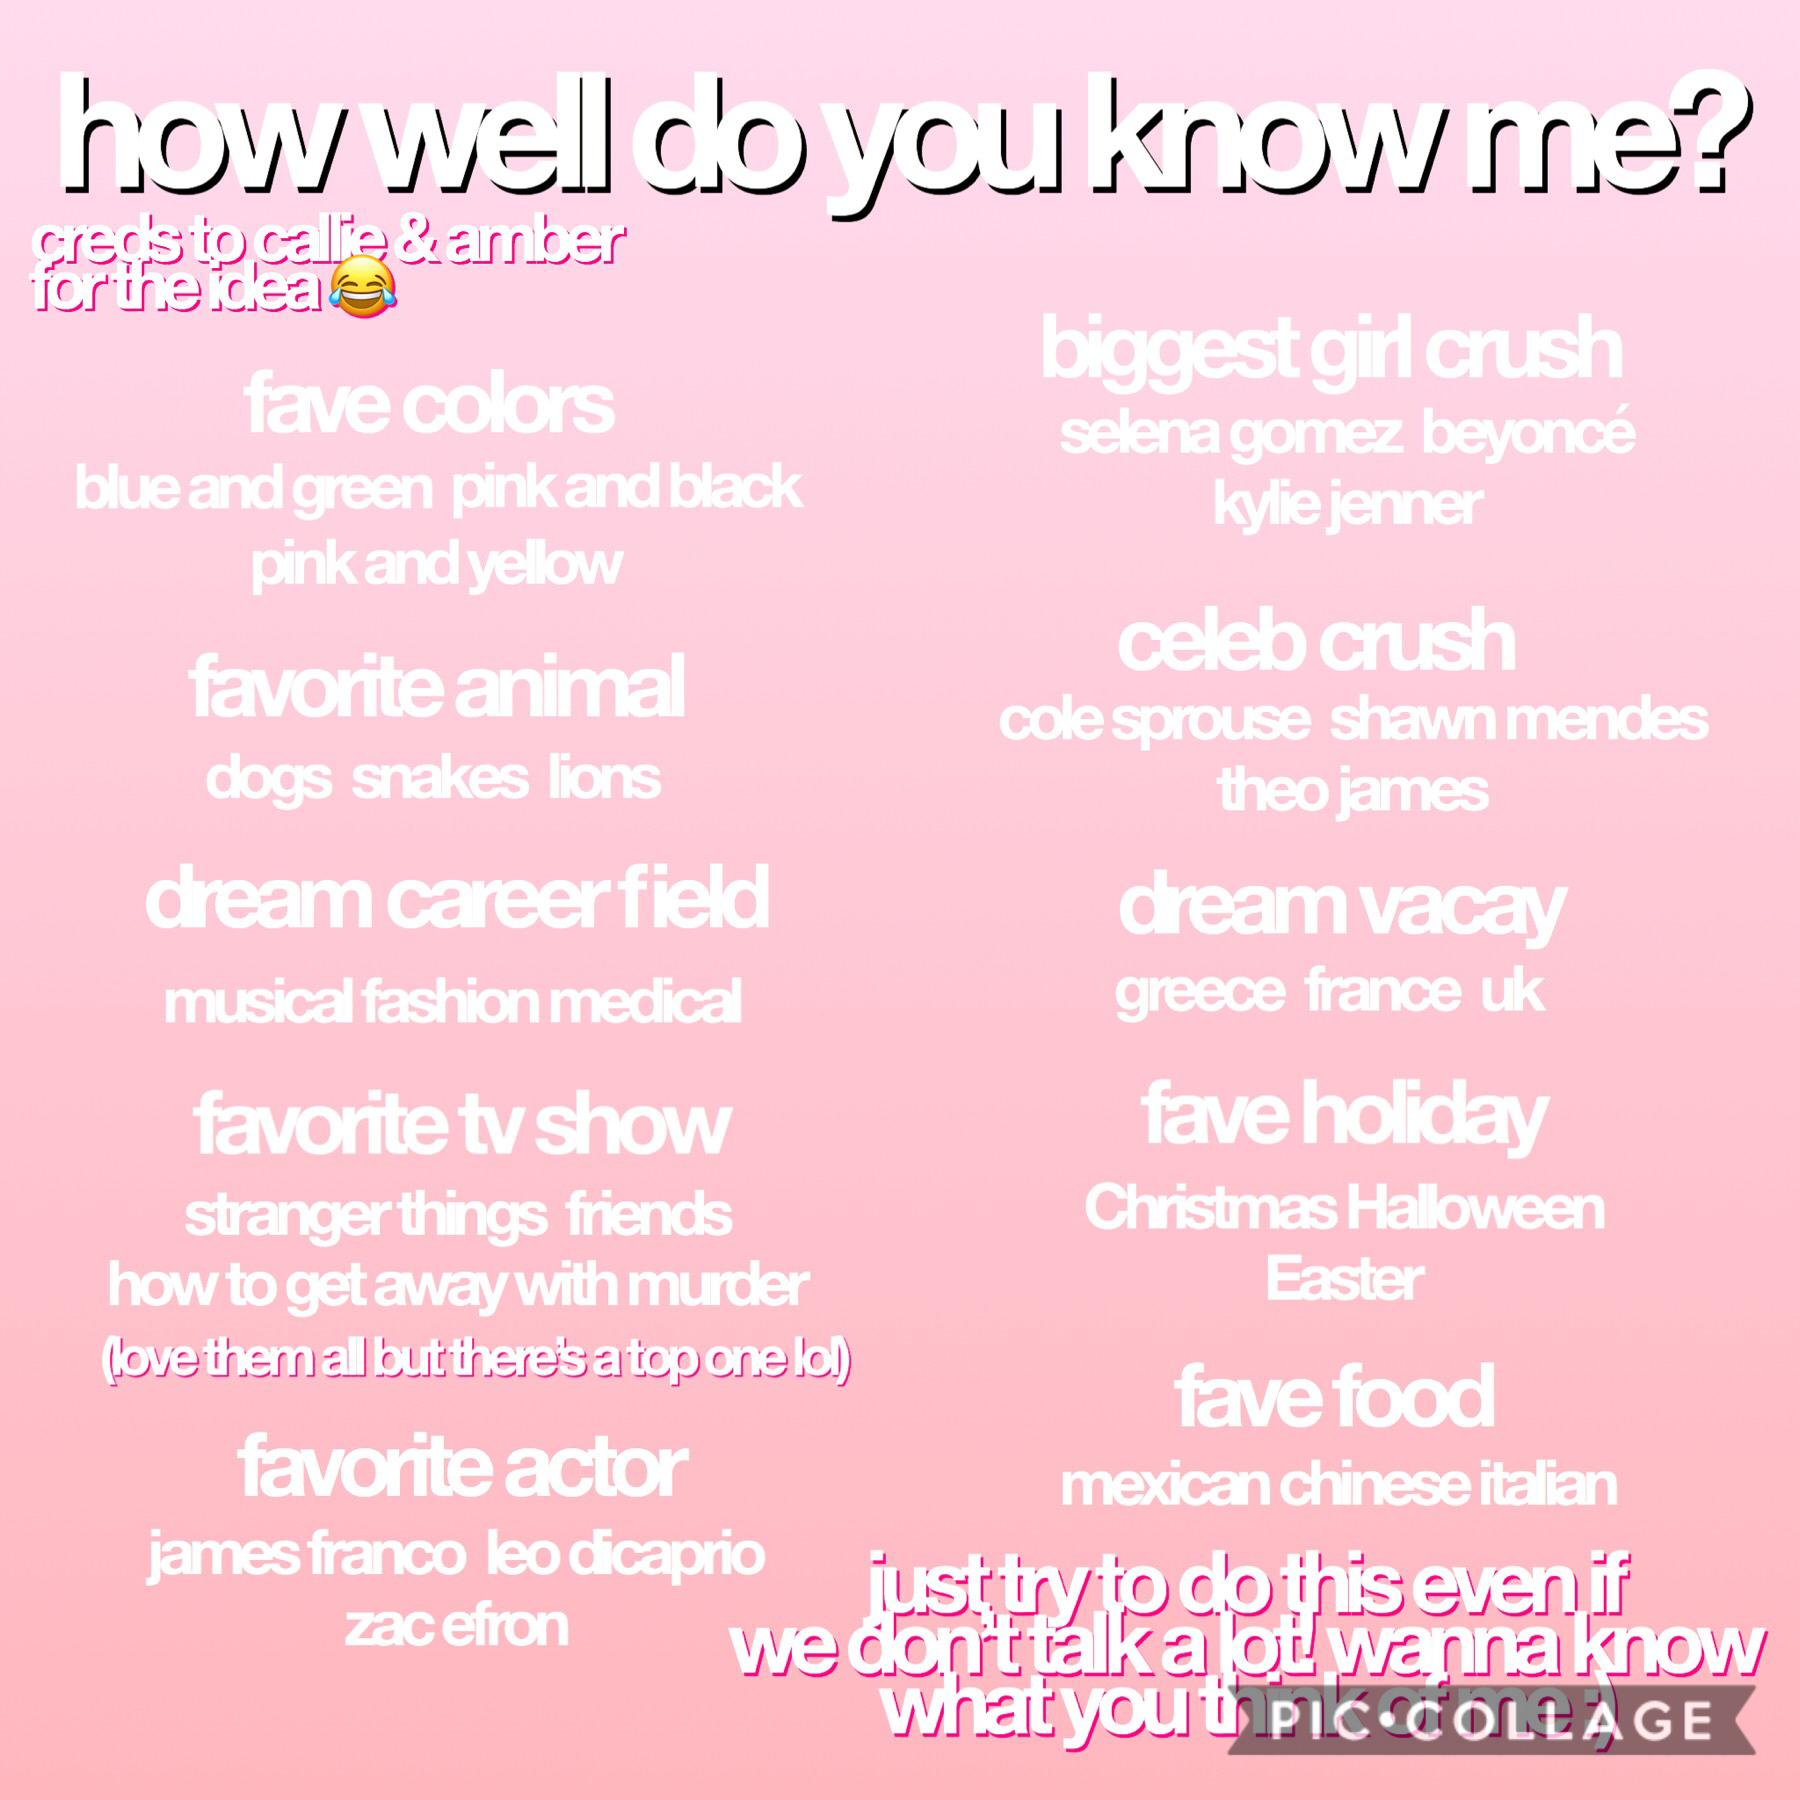 try to do this I’m curious 😂😂 credits to callie & amber !!